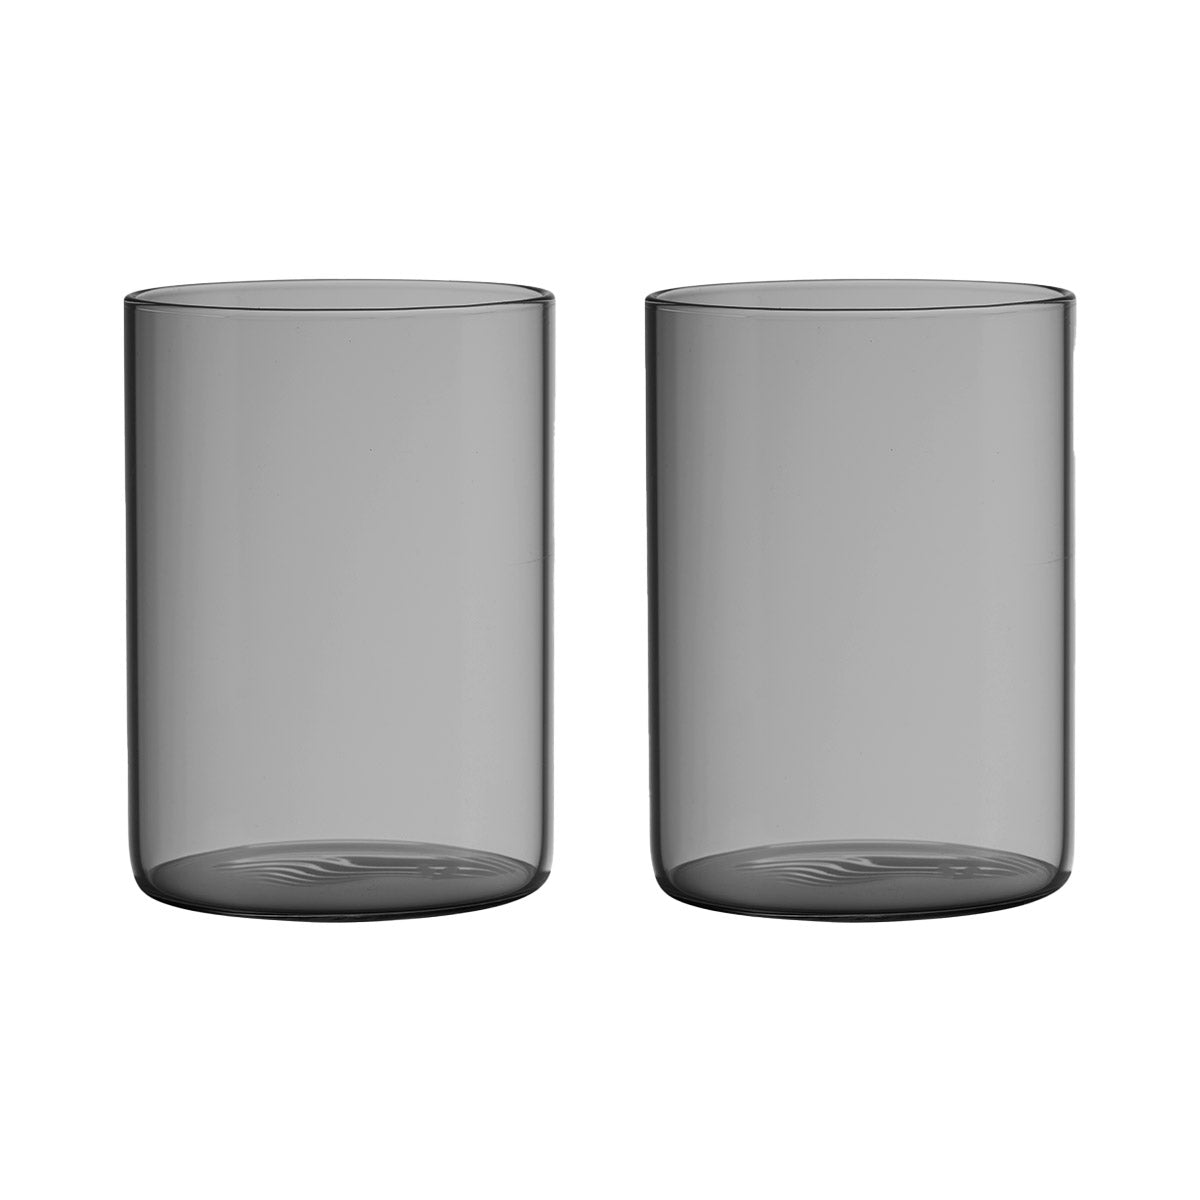 Favourite drinking glass - The Mute Collection (Set of 2 pcs)